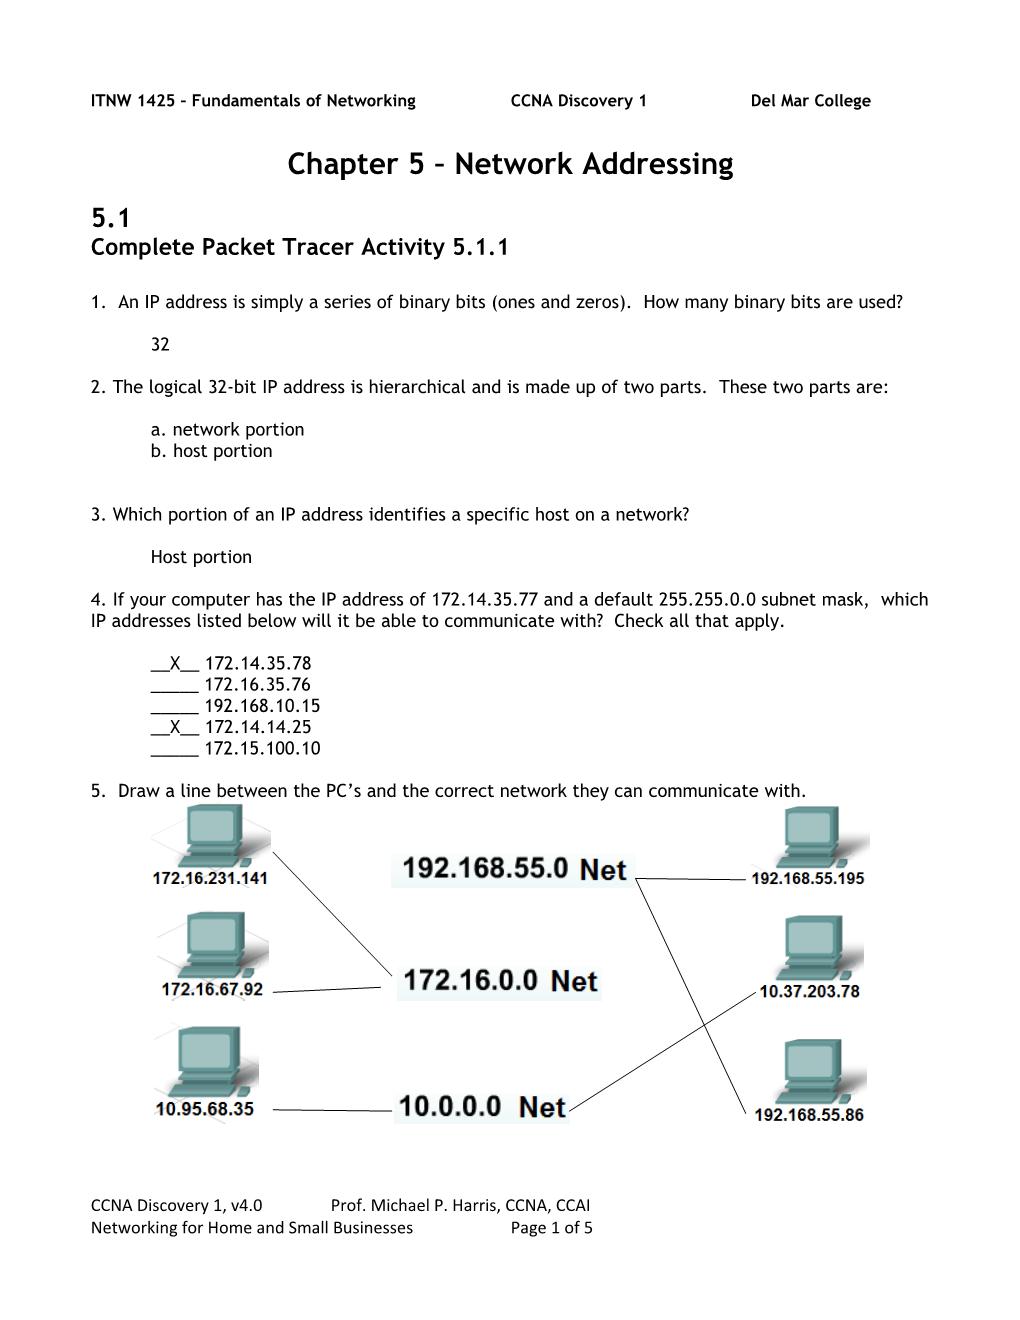 ITNW 1425 Fundamentals of Networking CCNA Discovery 1 Del Mar College